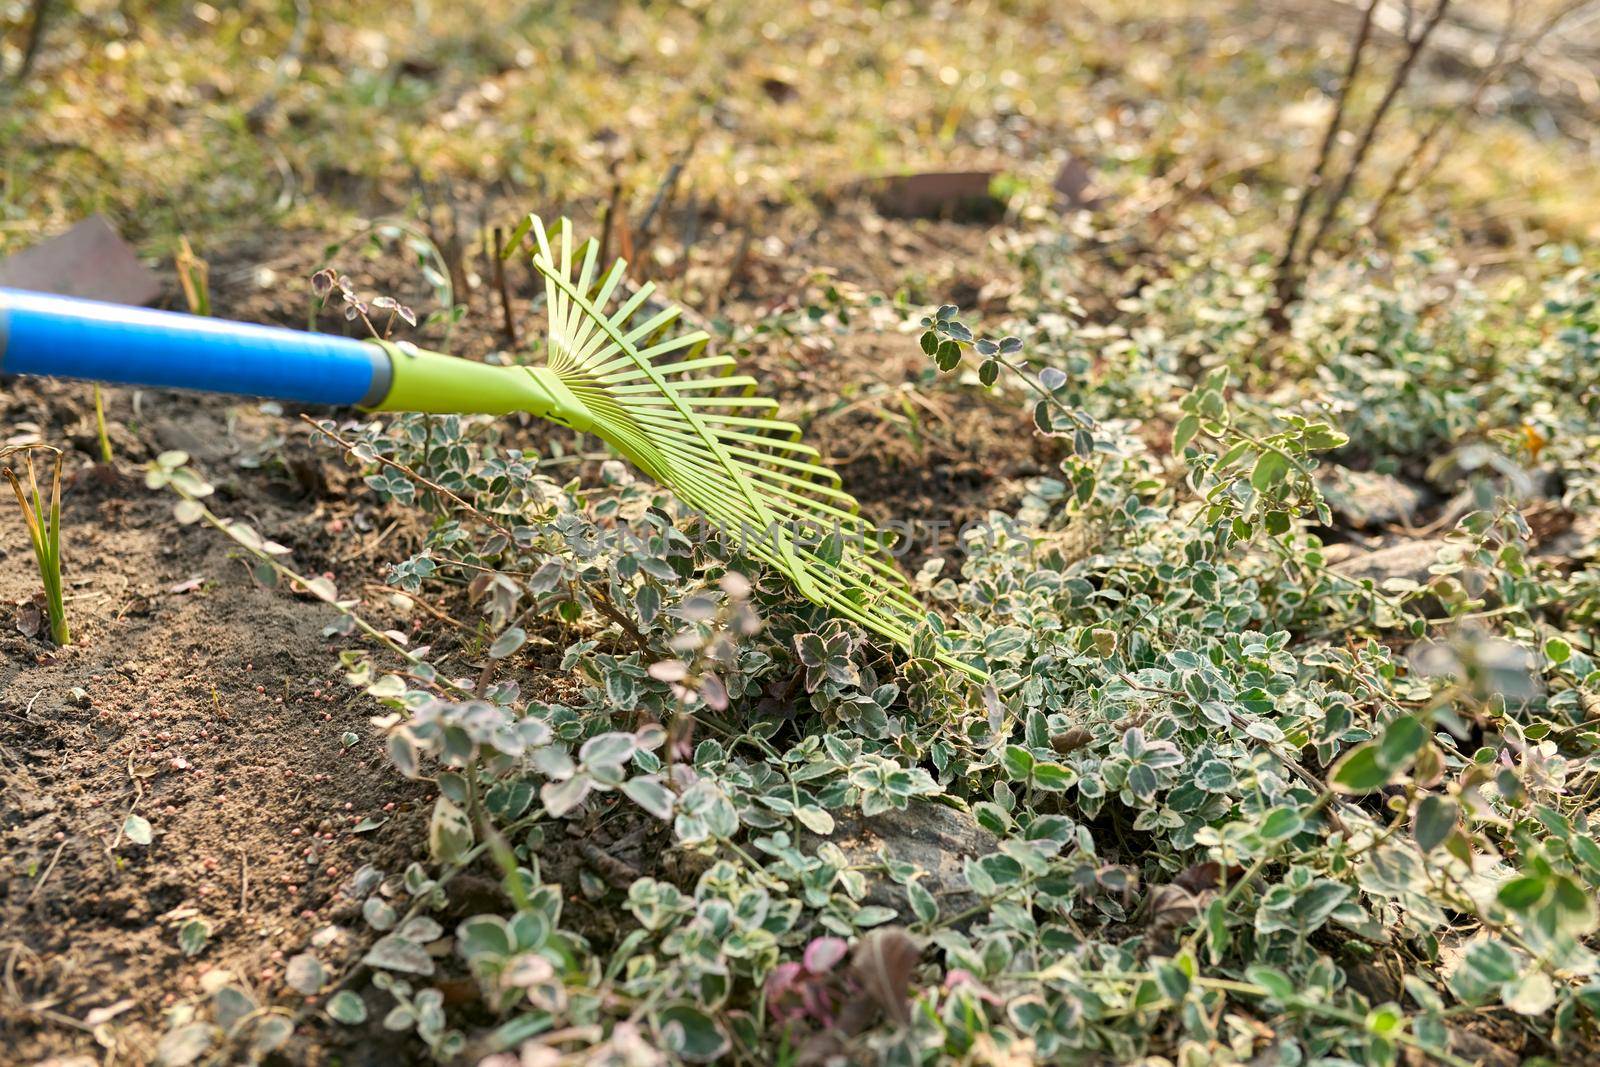 Spring cleaning of the garden with a rake from fallen leaves, dry grass. Spring seasonal gardening, springtime